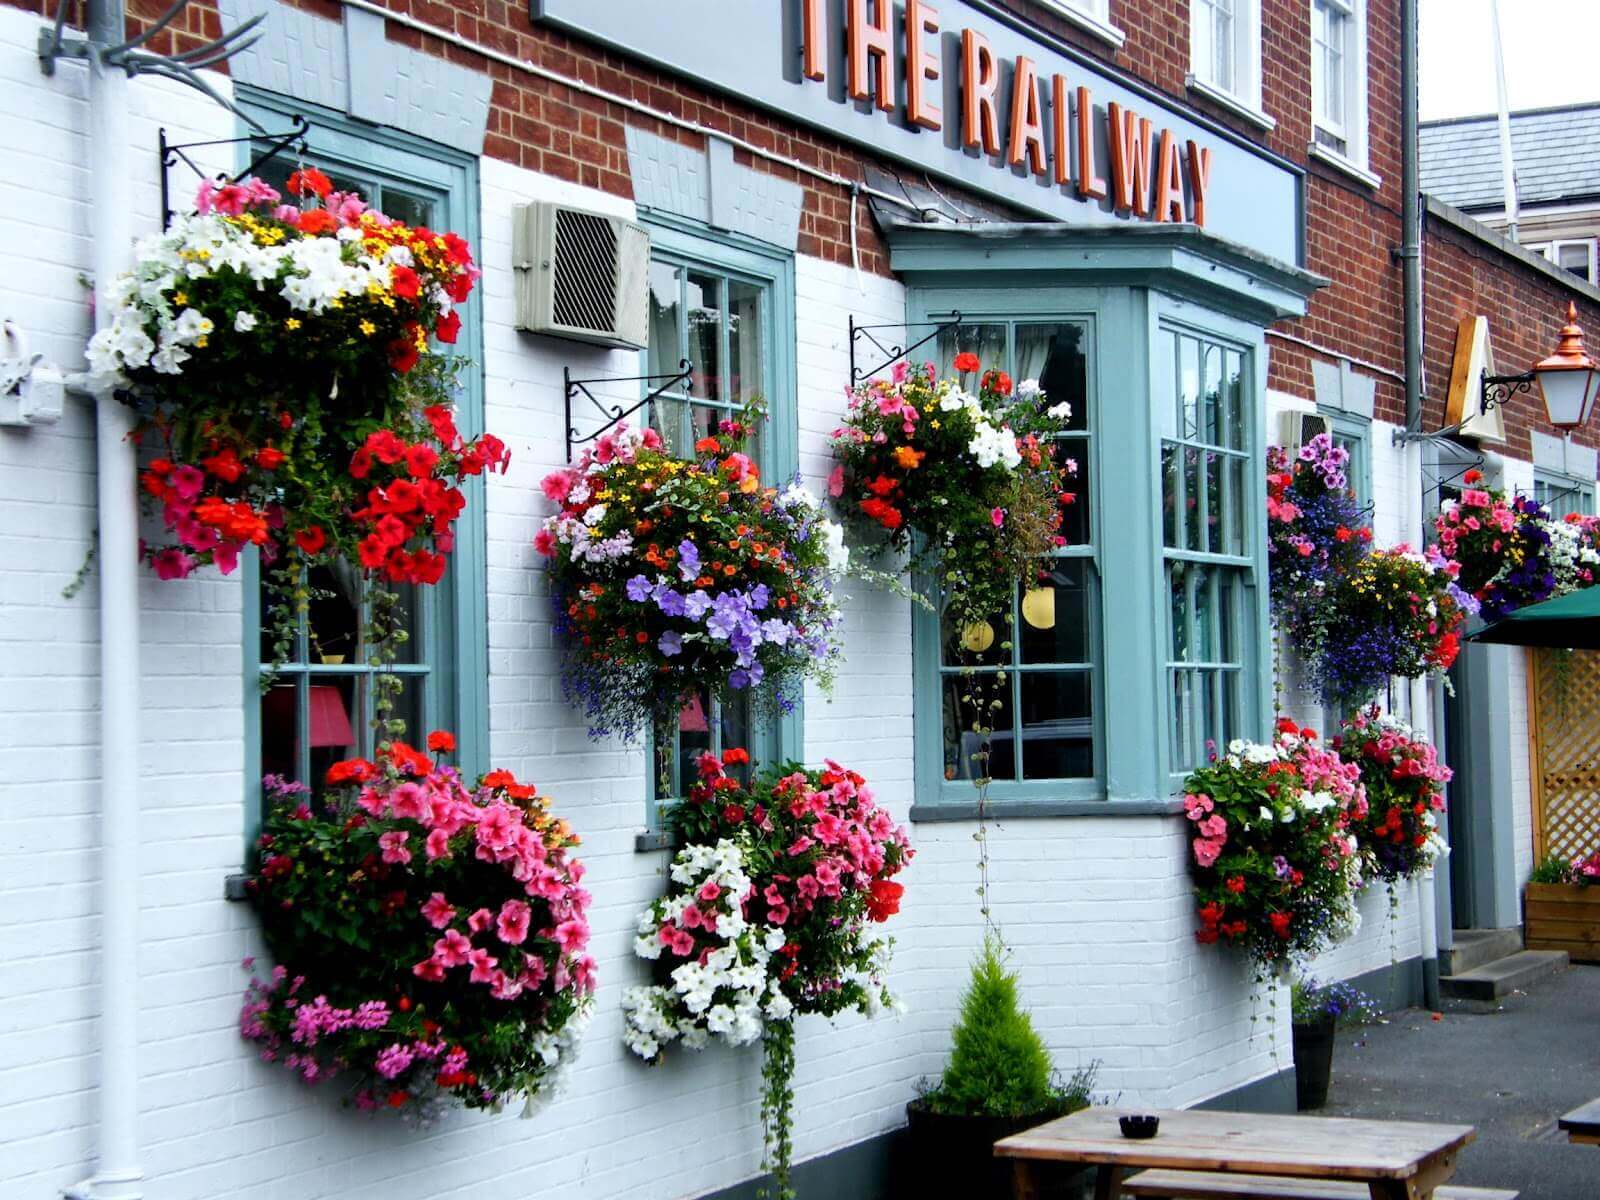 Cafe-Style Planters and Window Boxes